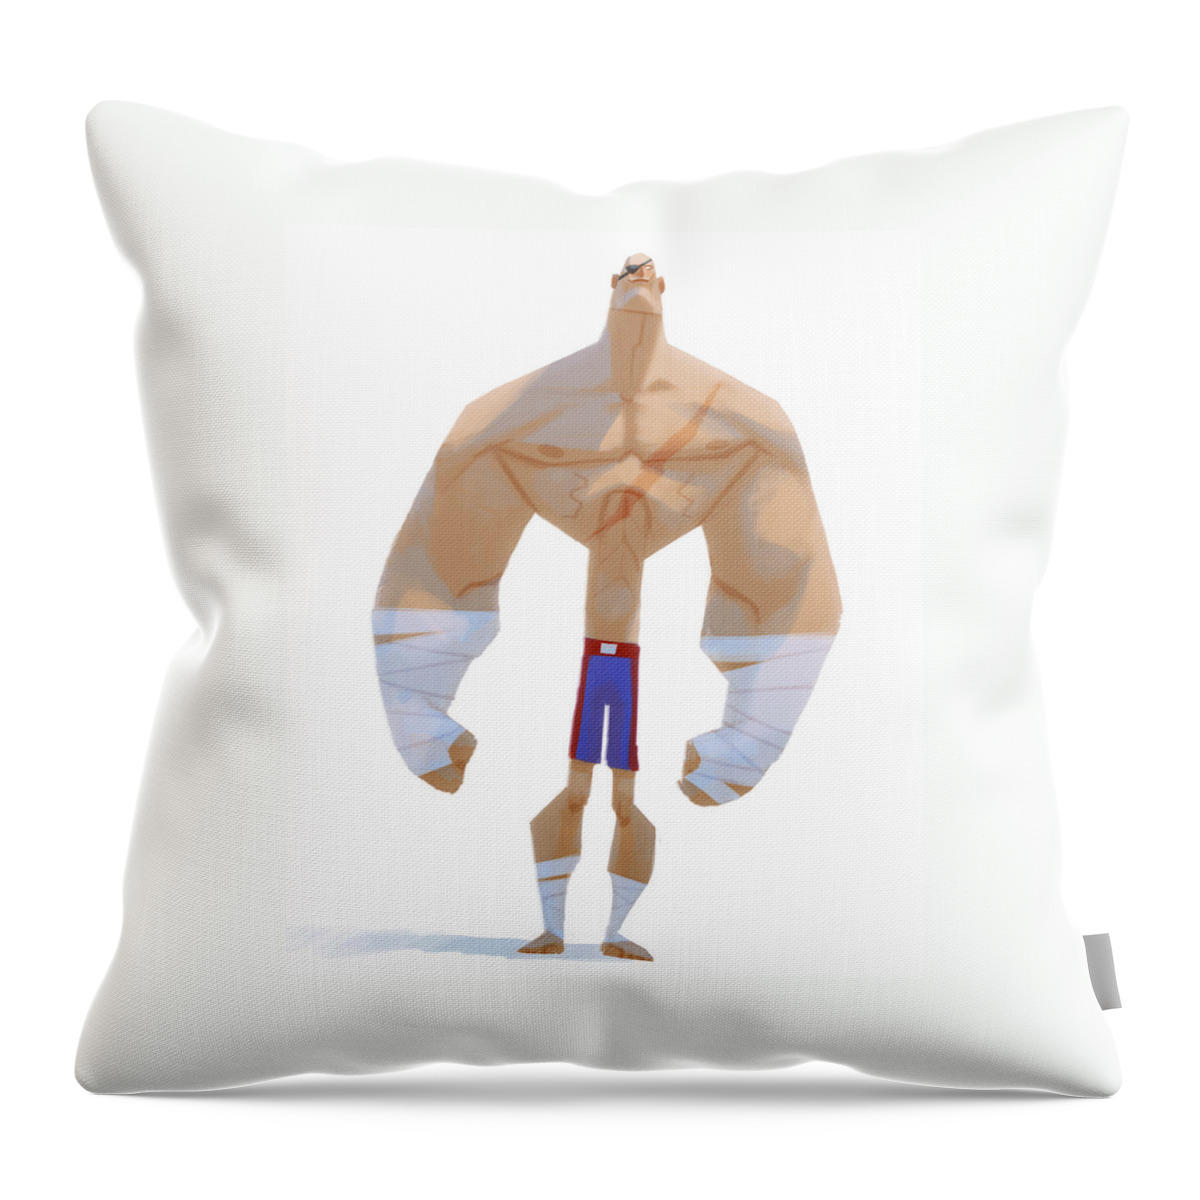  Throw Pillow featuring the painting Fighter by Adam Ford